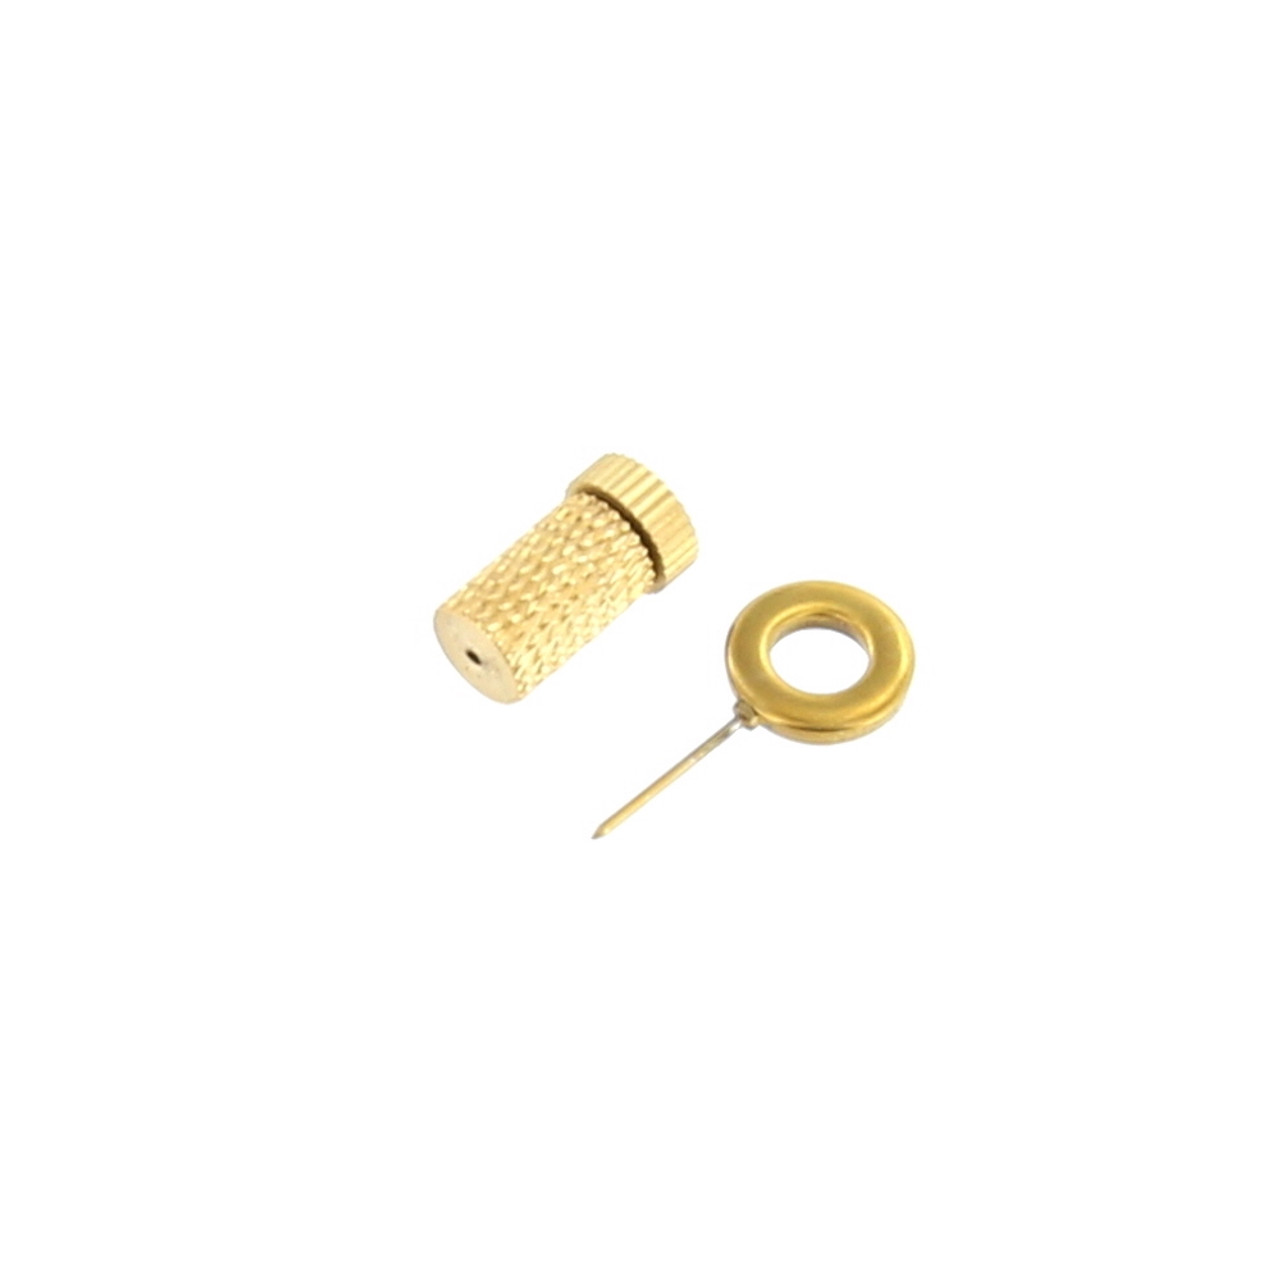 Positioning Needle for Hand Sewing Leather, 12mm Needle